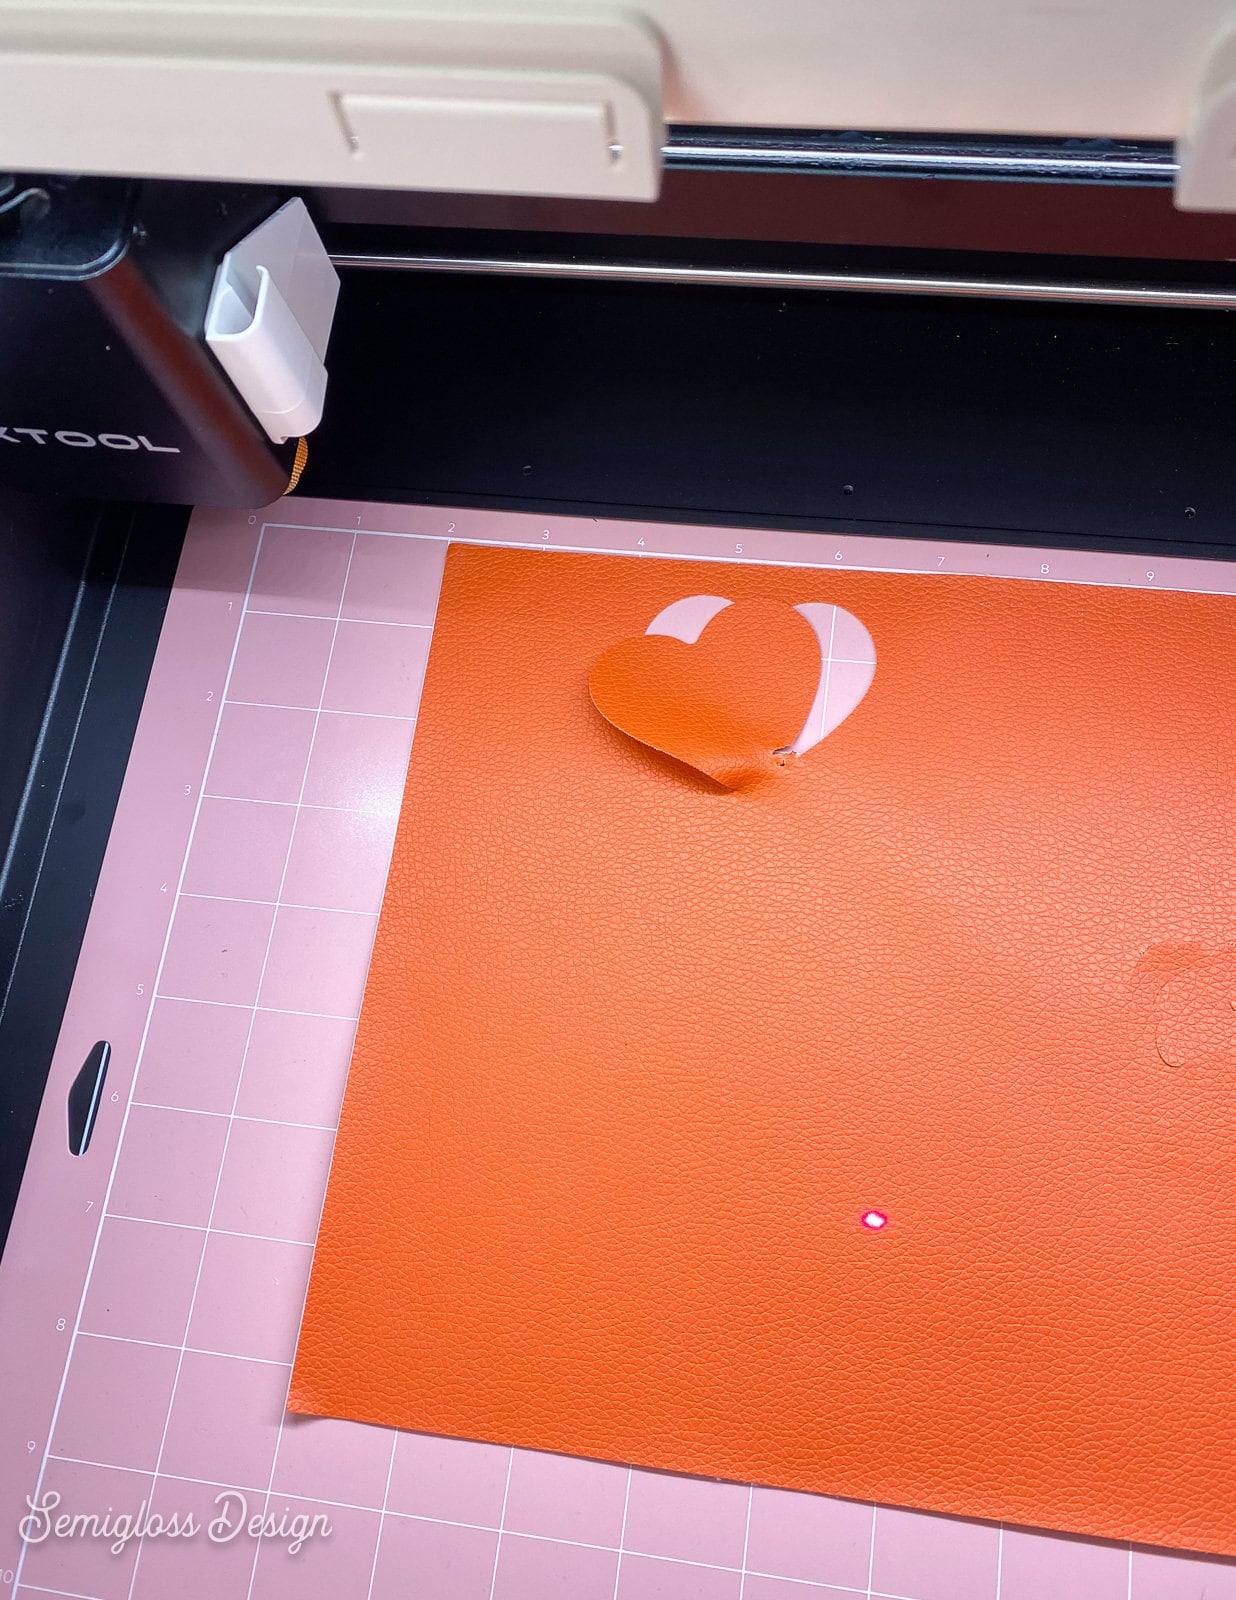 xTool M1 Review: All About the xTool M1 Laser Cutter - Semigloss Design